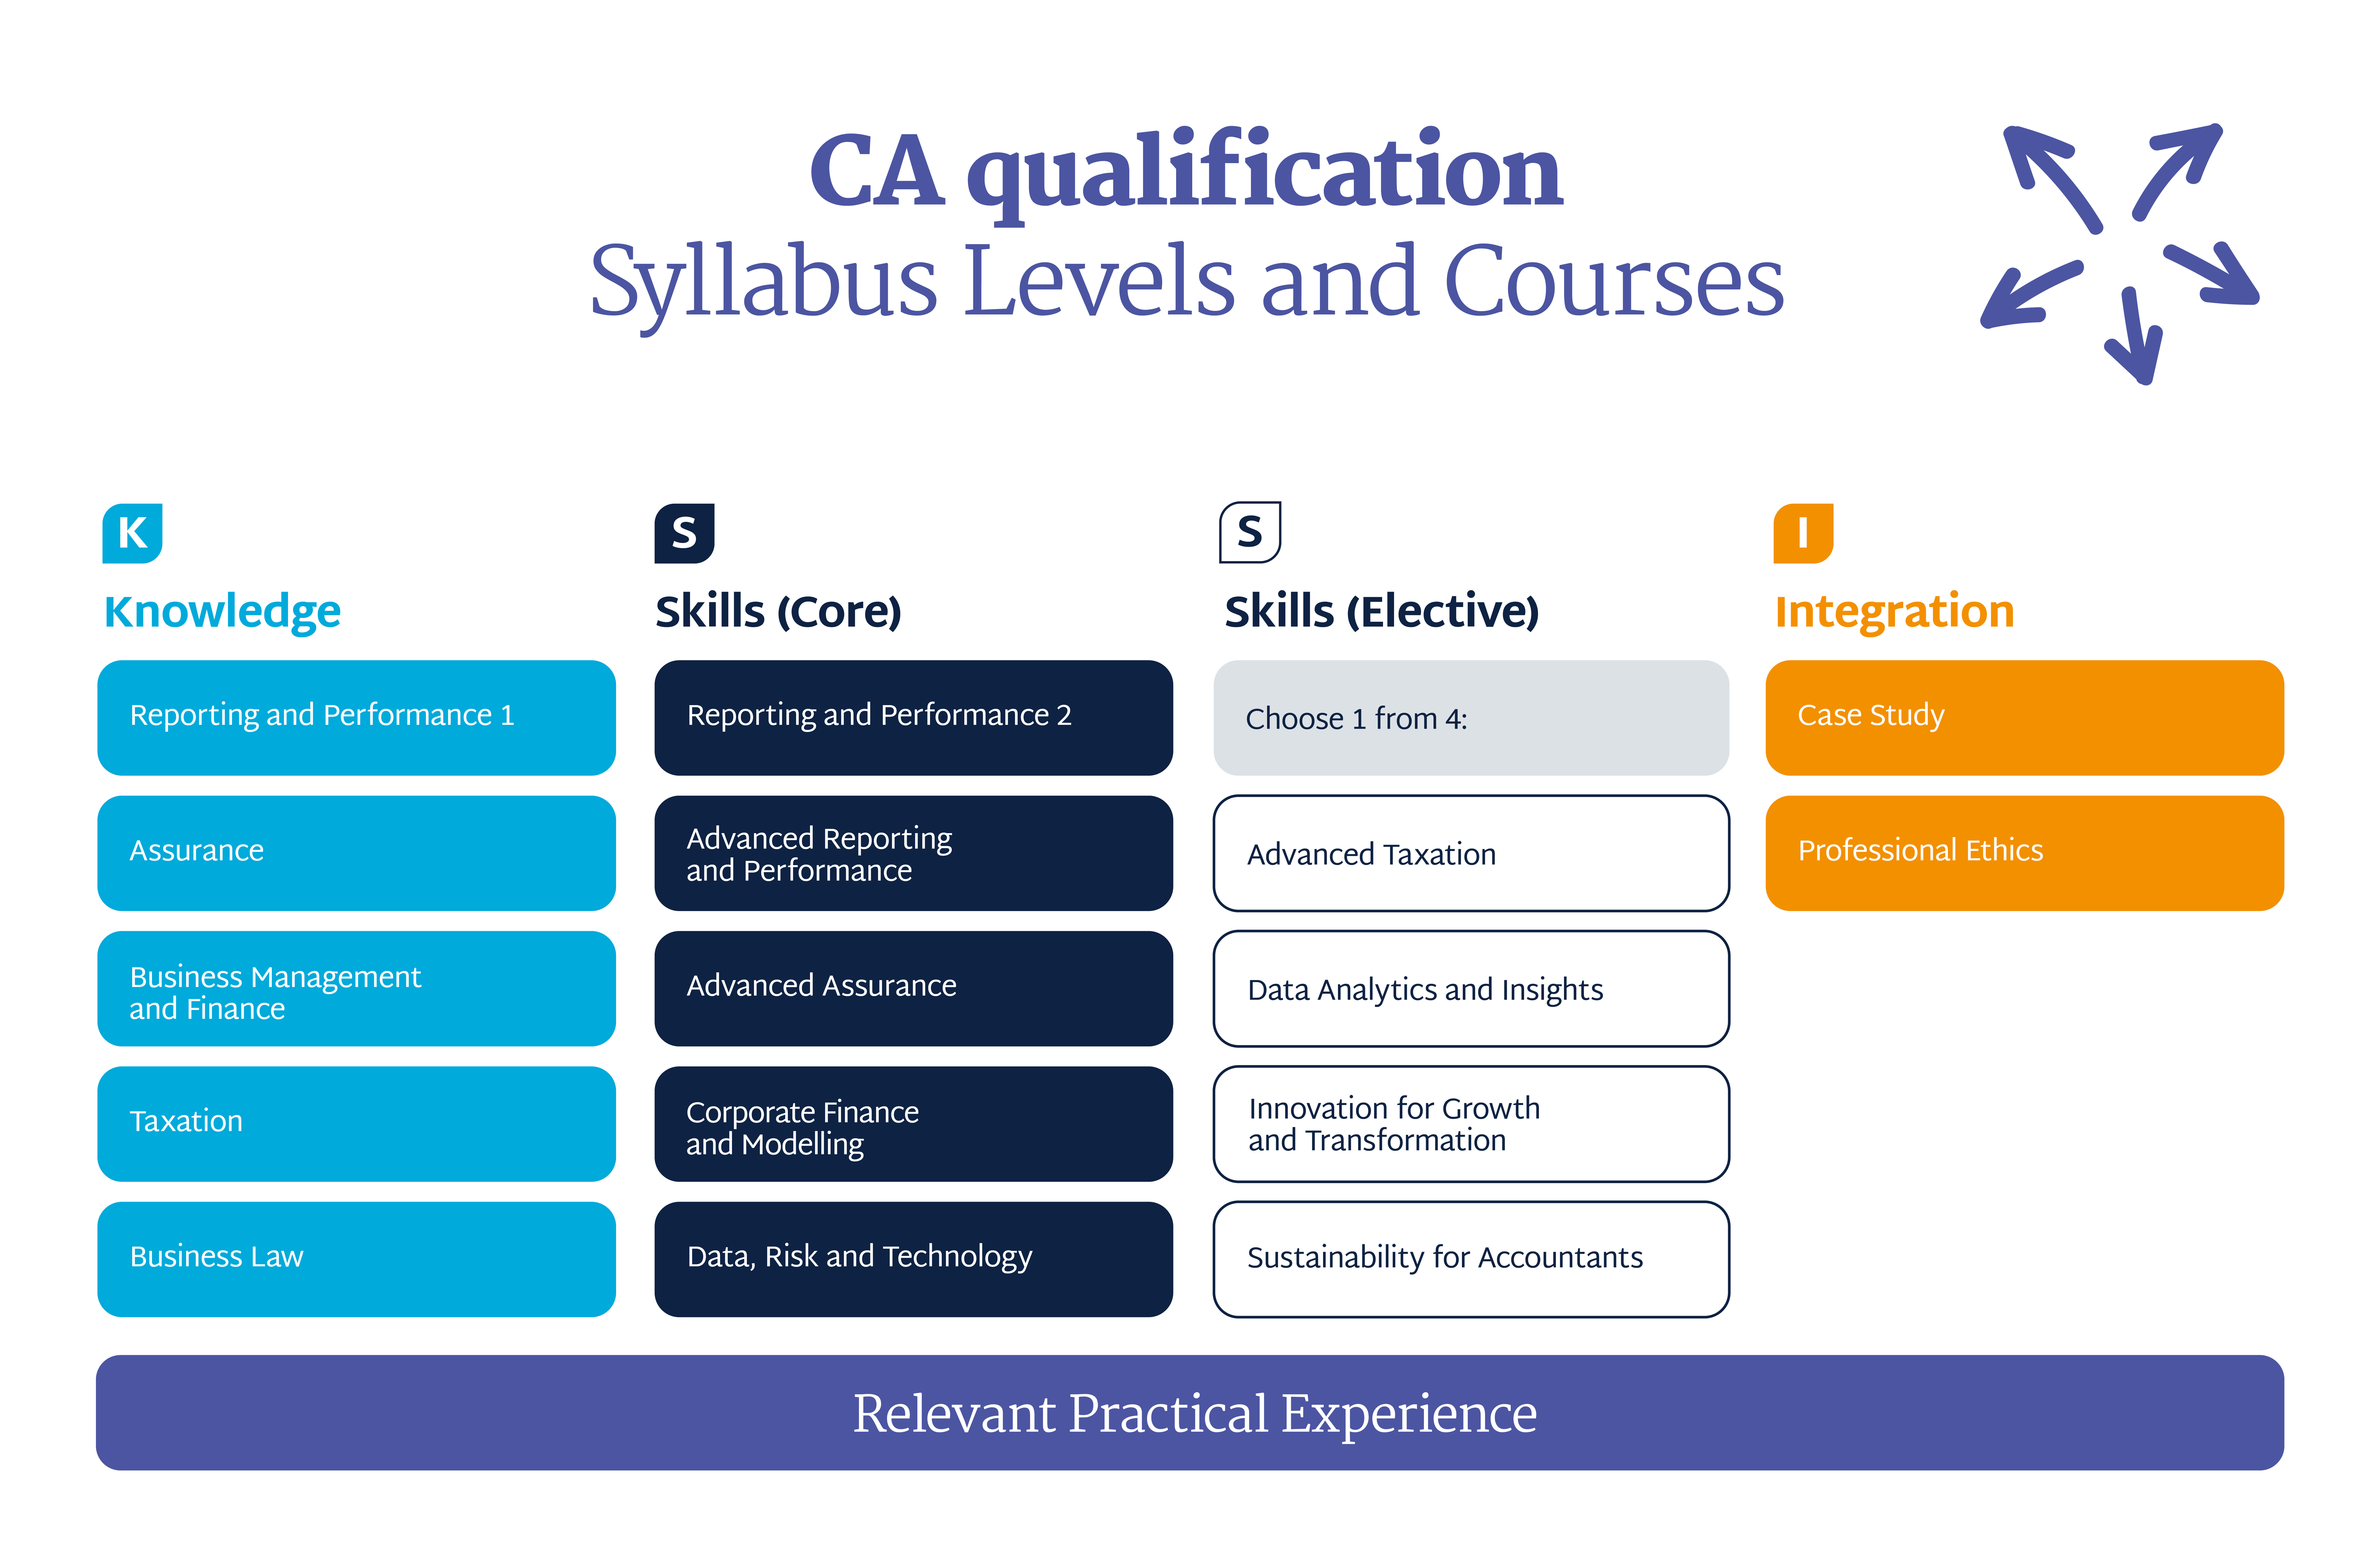 New syllabus levels and courses